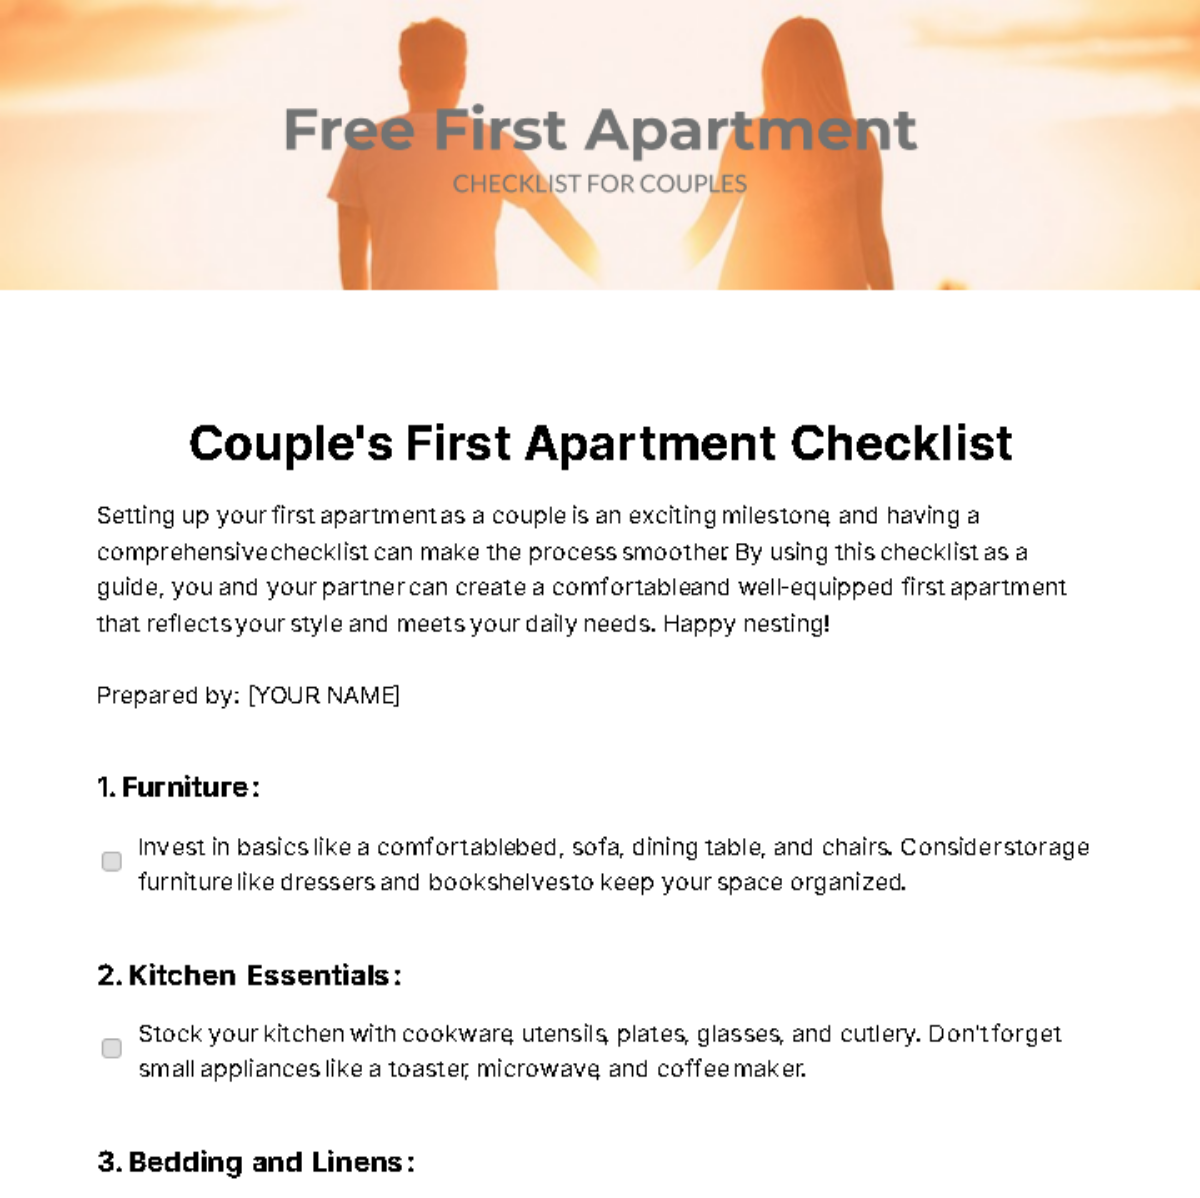 Free First Apartment Checklist For Couples Template